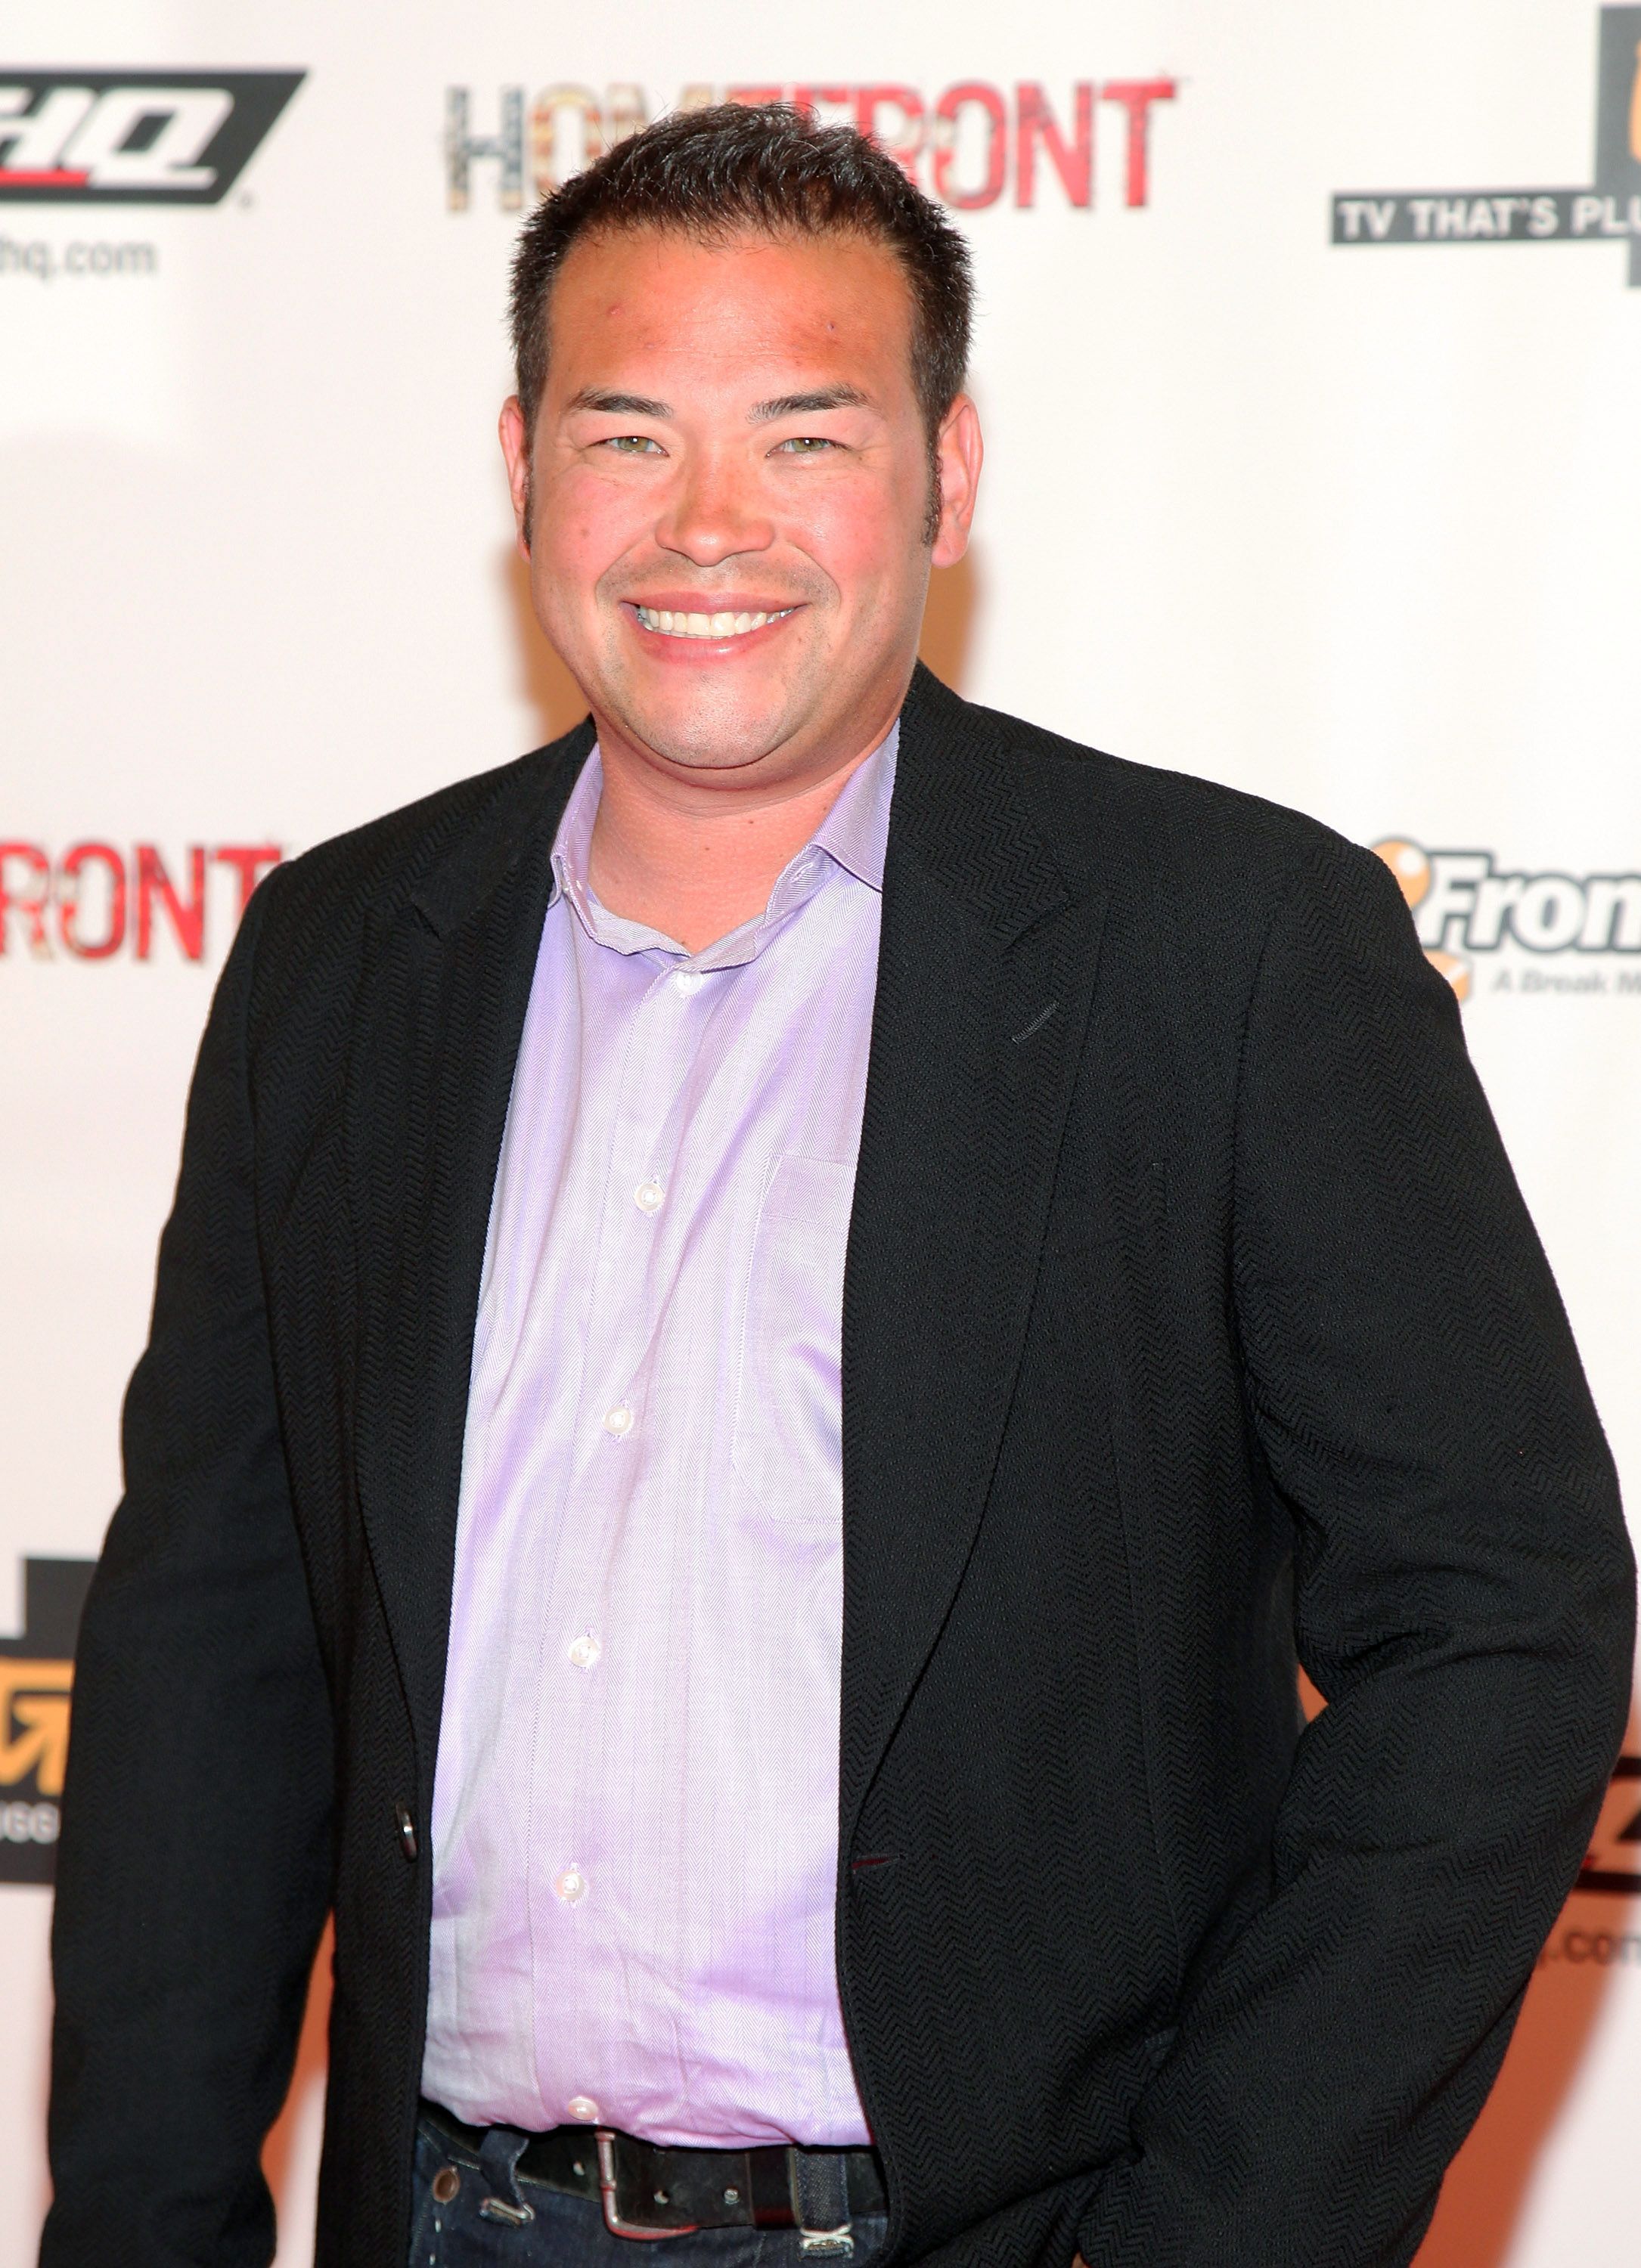 Jon Gosselin during the THQ's E3 'Take No Prisoners' event at The Standard Hotel Downtown on June 16, 2010 in Los Angeles, California. | Source: Getty Images